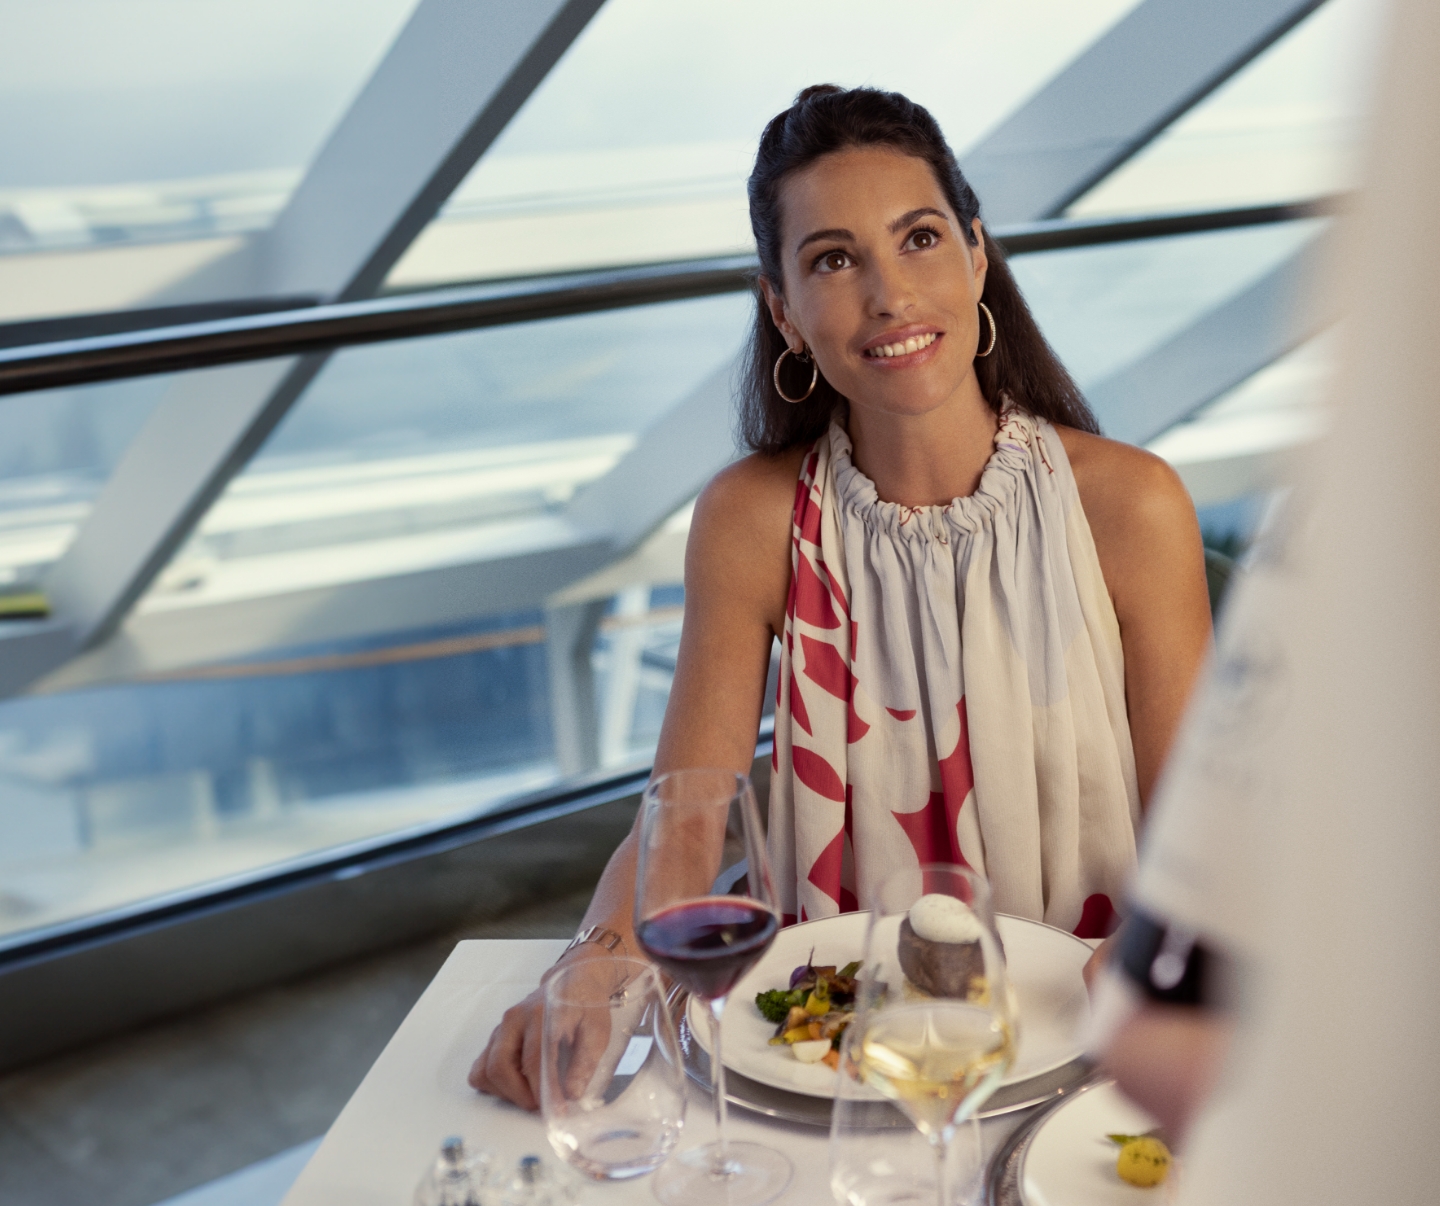 An elegant moment at the Yacht Club restaurant on your luxury cruise, as a delighted woman smiles while being served a gourmet dinner with a red and white wine pairing by the attentive Yacht Club staff, epitomizing the essence of dining and indulgence in luxury.